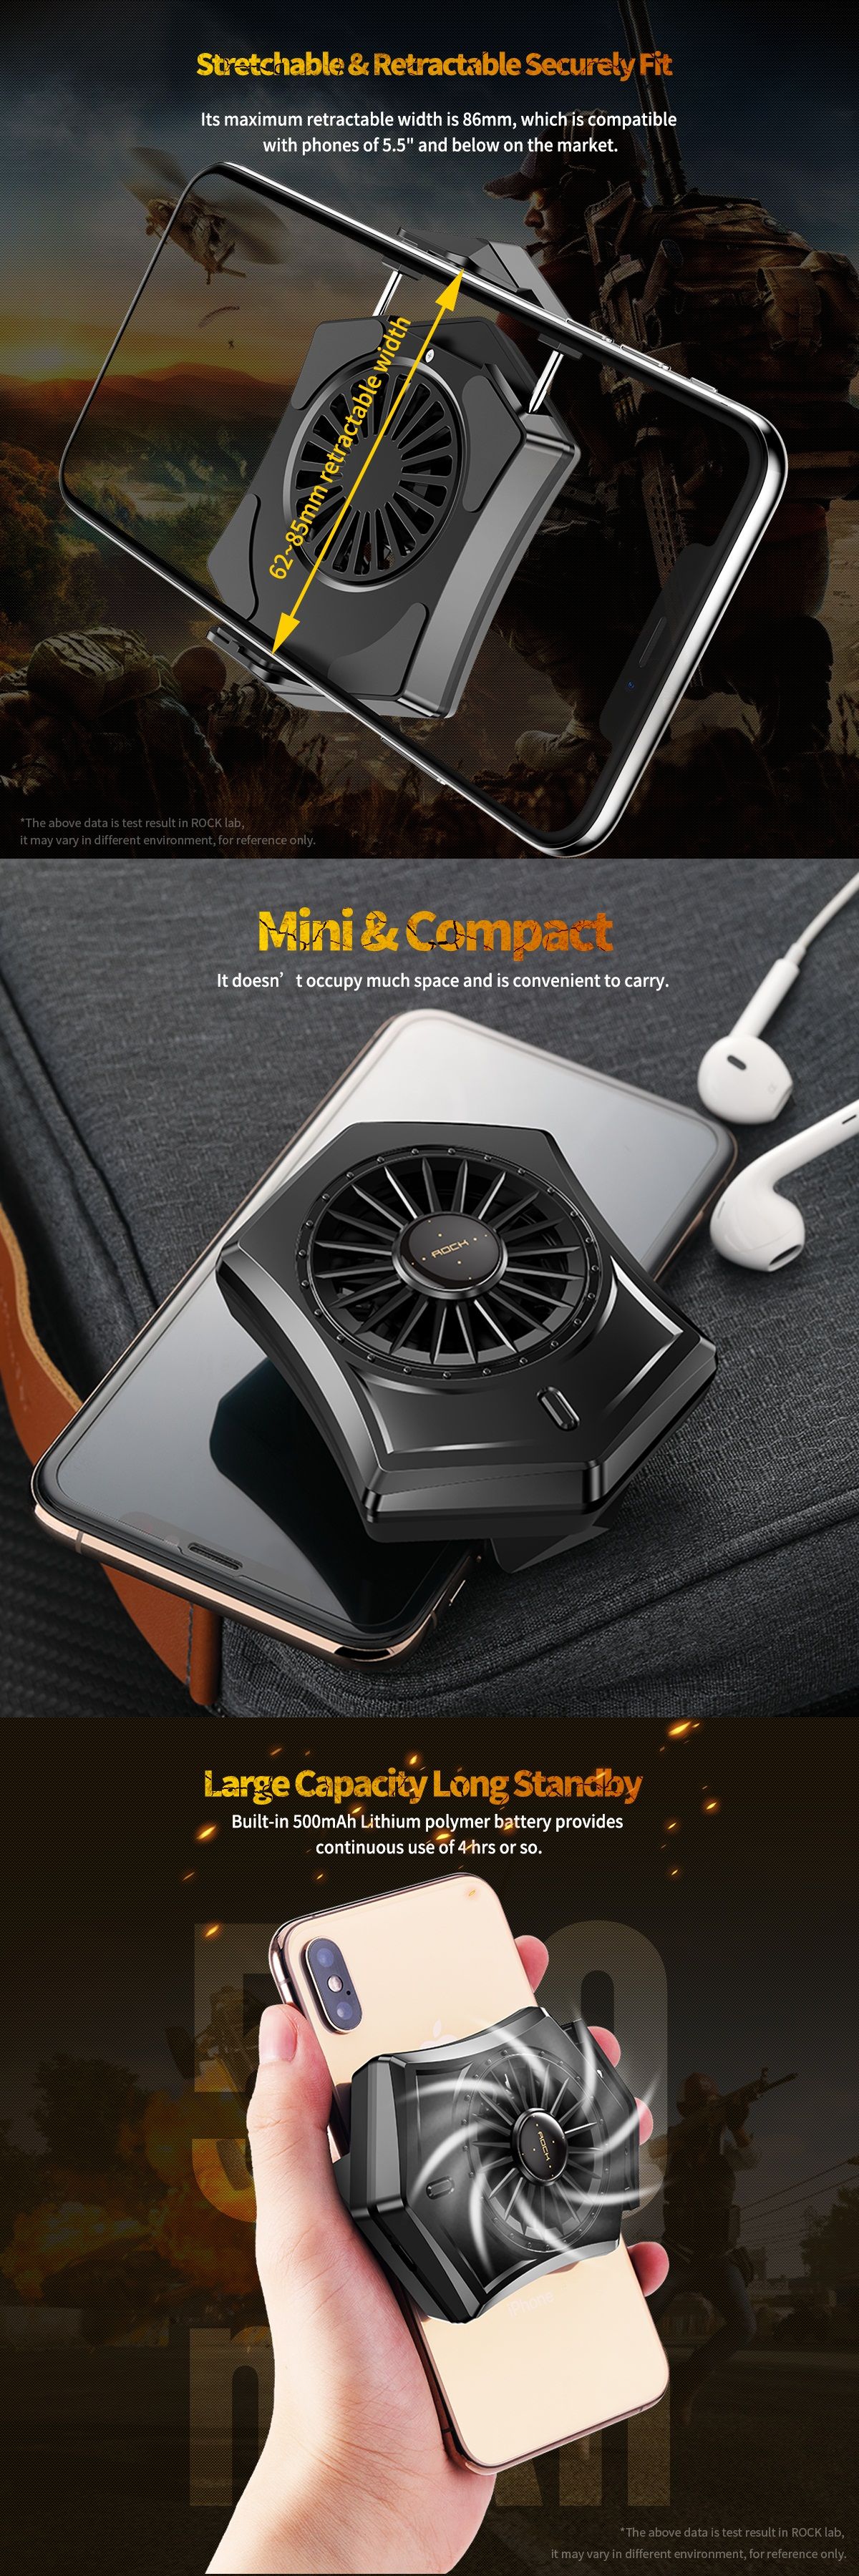 ROCK-Silent-Retractable-Mini-Cooling-Fan-For-iPhone-X-XS-HUAWEI-P30-S10-1548049